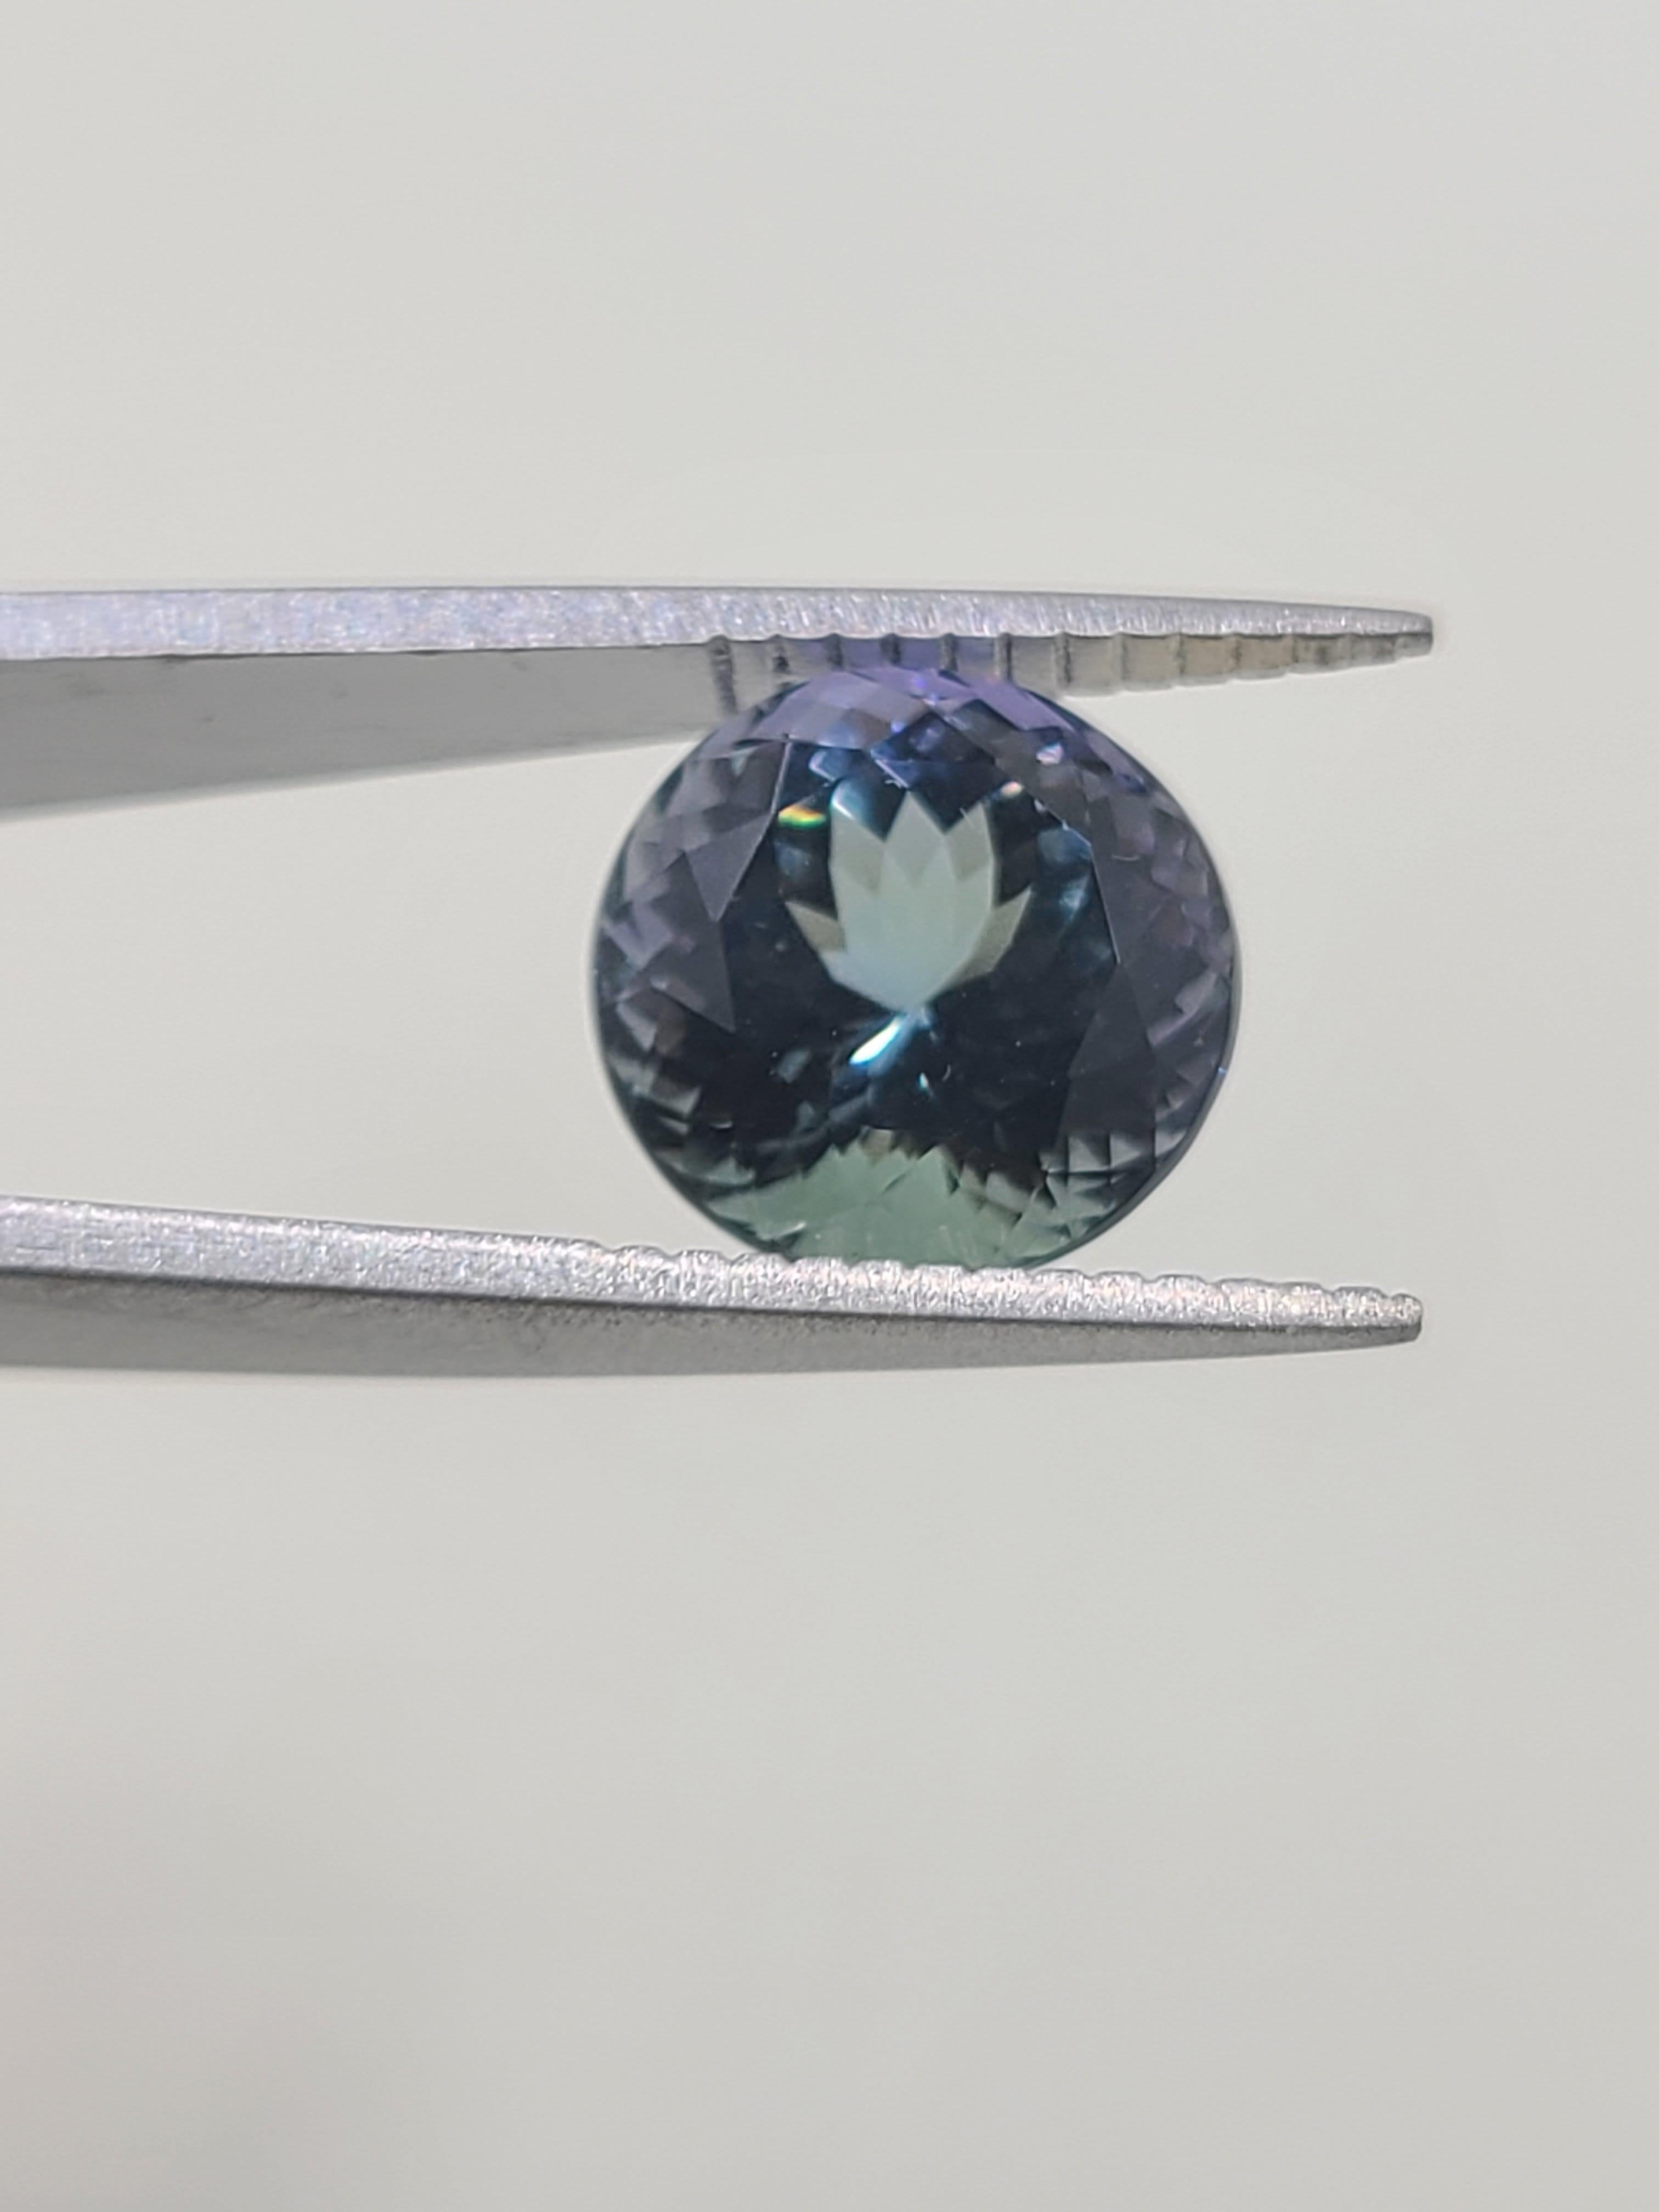 This loose tanzanite measures 10mm in diameter by 7.20mm in depth with a round faceted cut, giving it a good symmetry as it displays its breathtaking shade.

This beautiful tanzanite exhibits purple, blue, and blue-green, marketed at ocean tanzanite